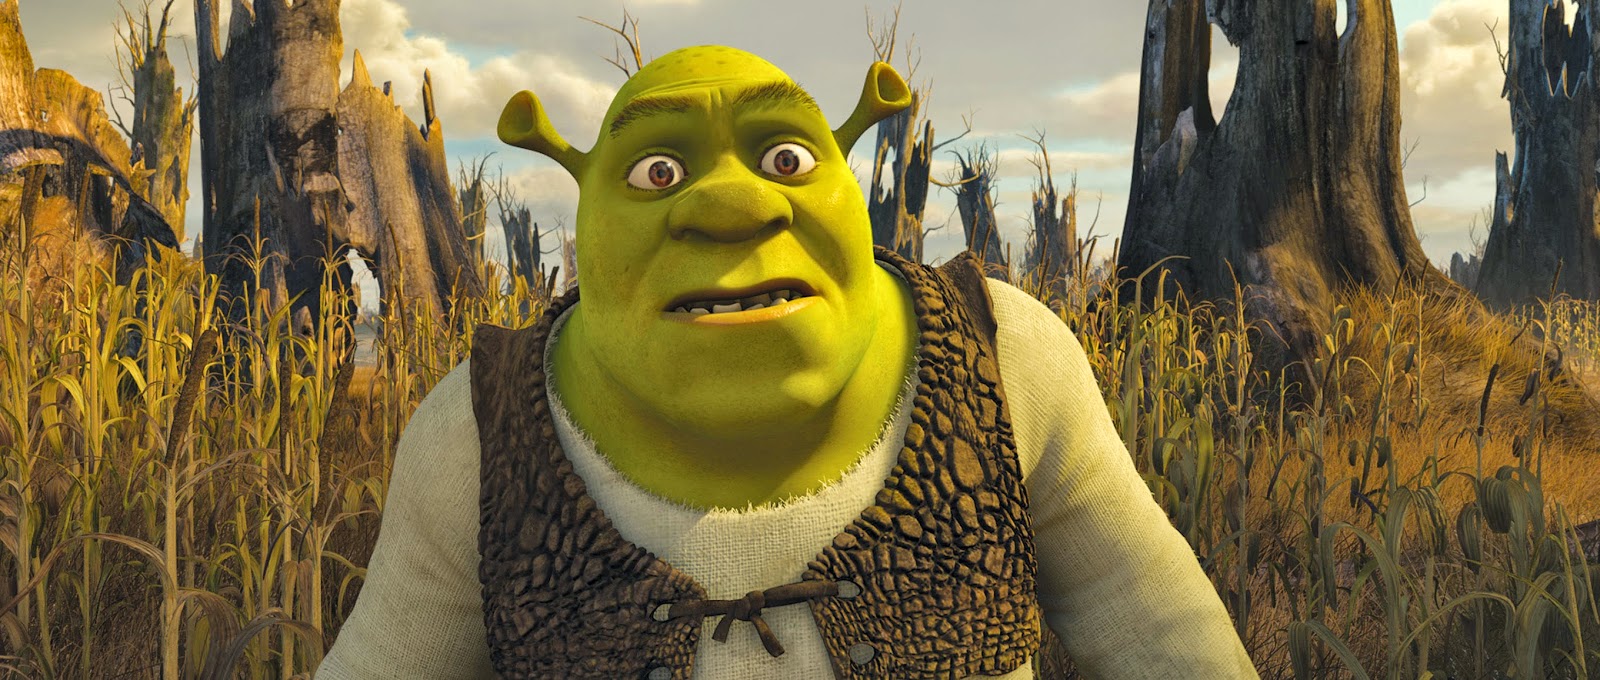 Dwilly posted: My chat with Shrek